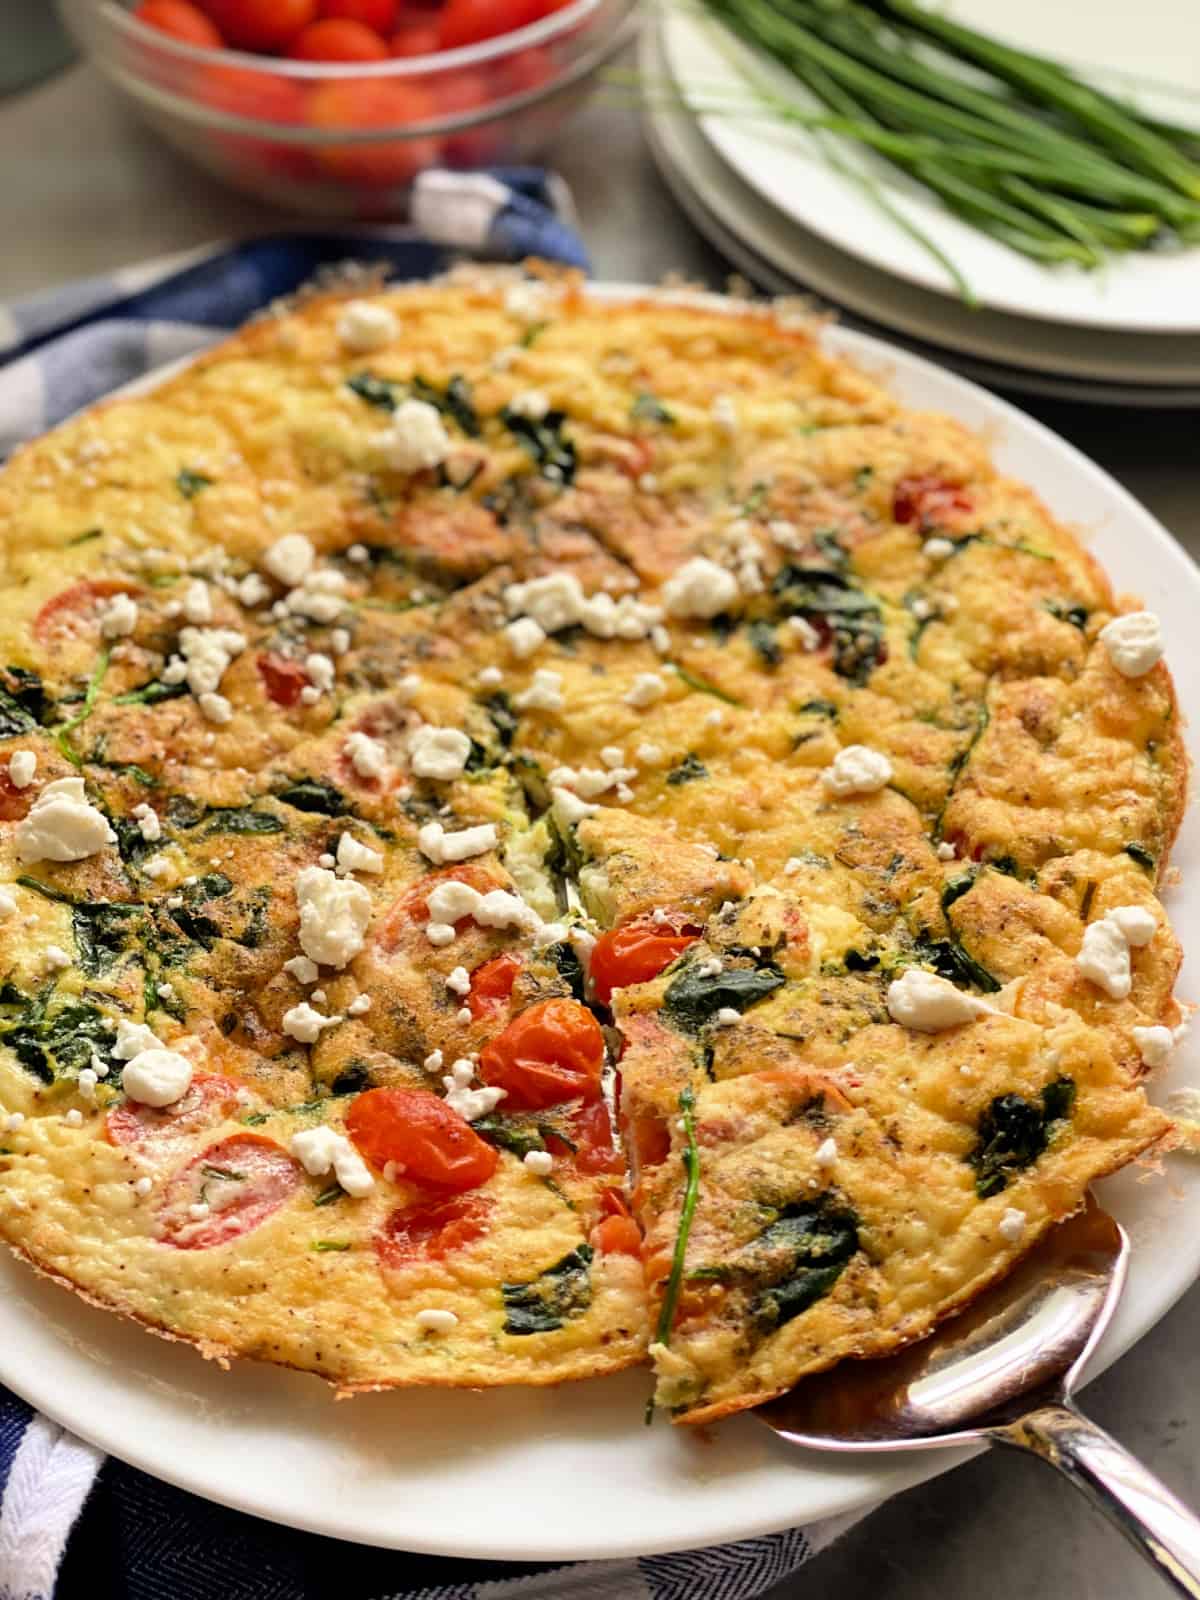 Egg fritatta with vegetables and goat cheese with a silver serving utensil pulling a slice out.